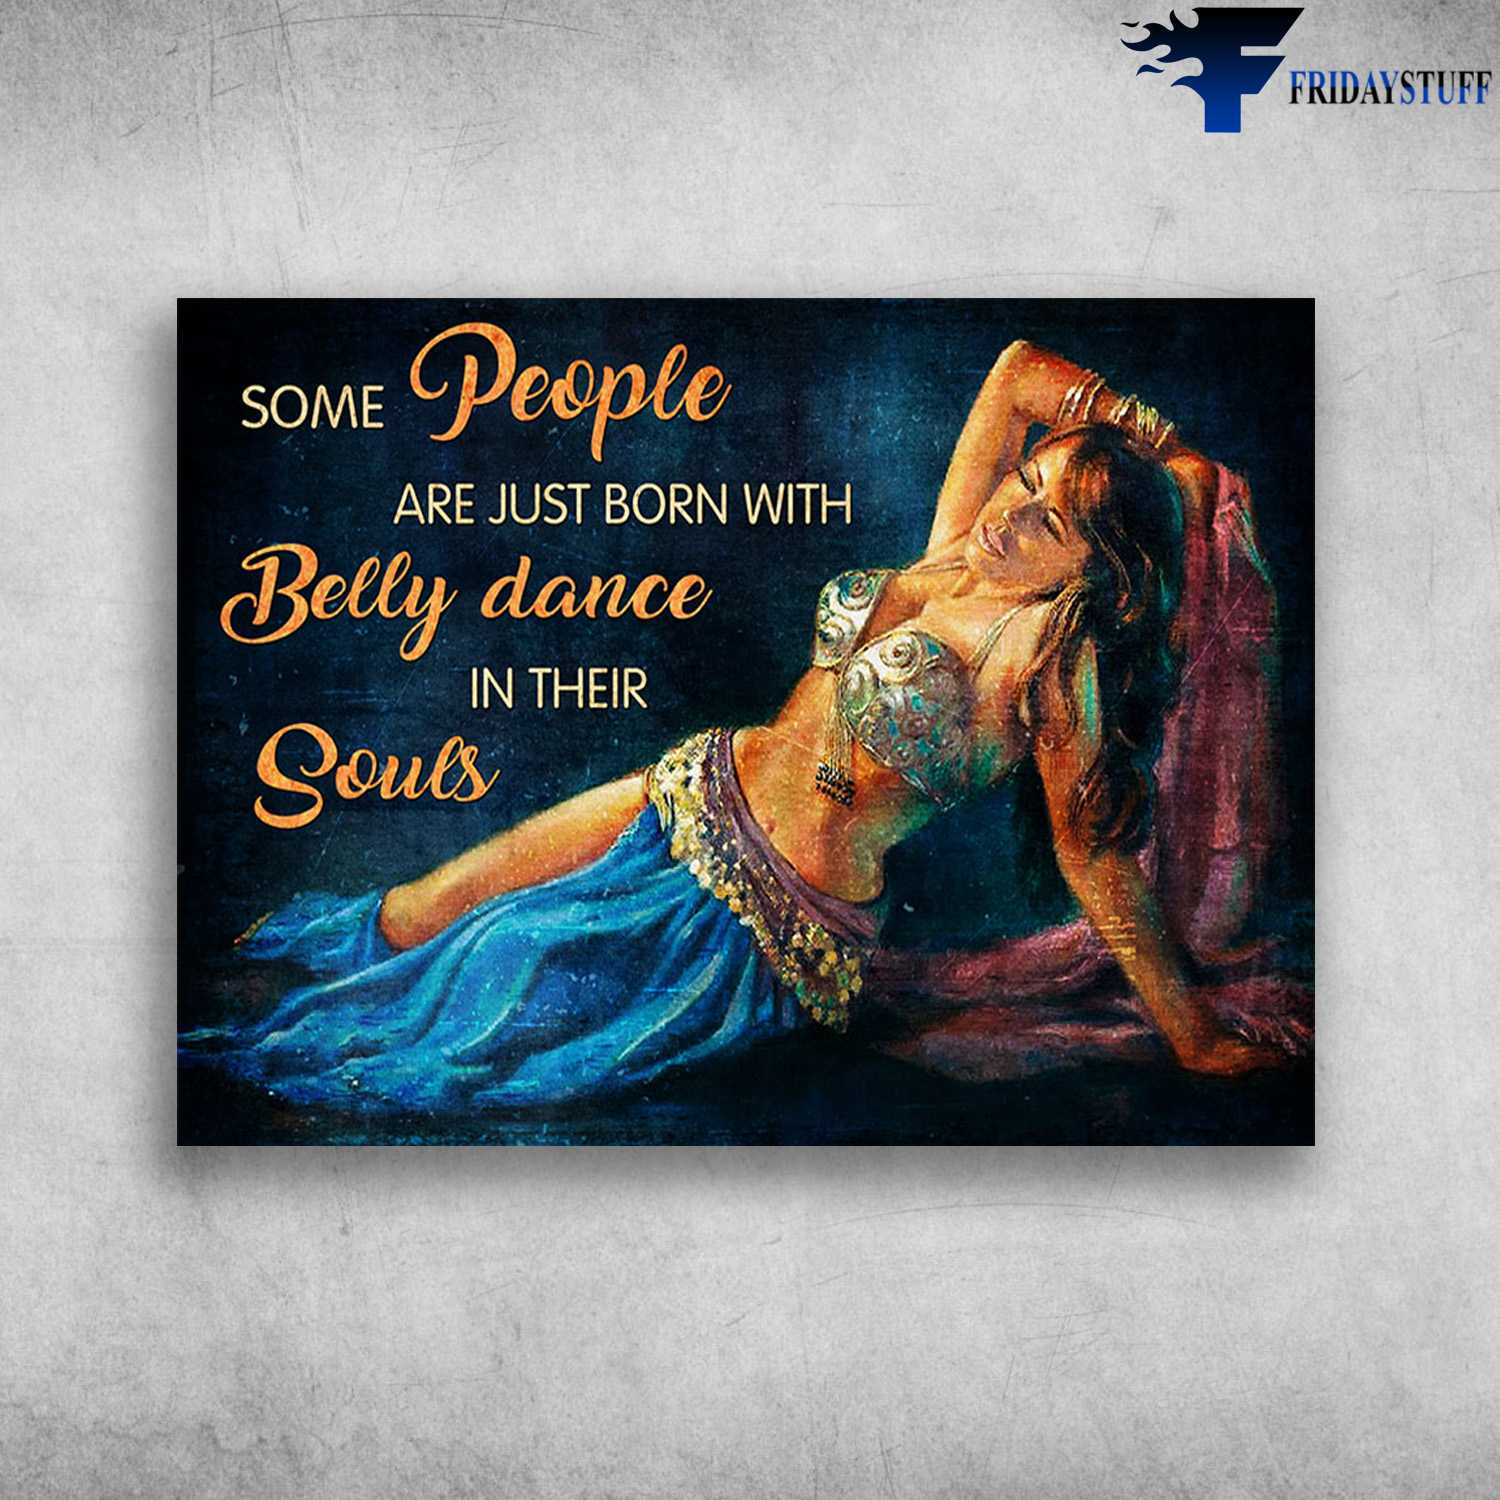 Belly Dancer - Some People Are Just Born With, Belly Dance In Their Souls